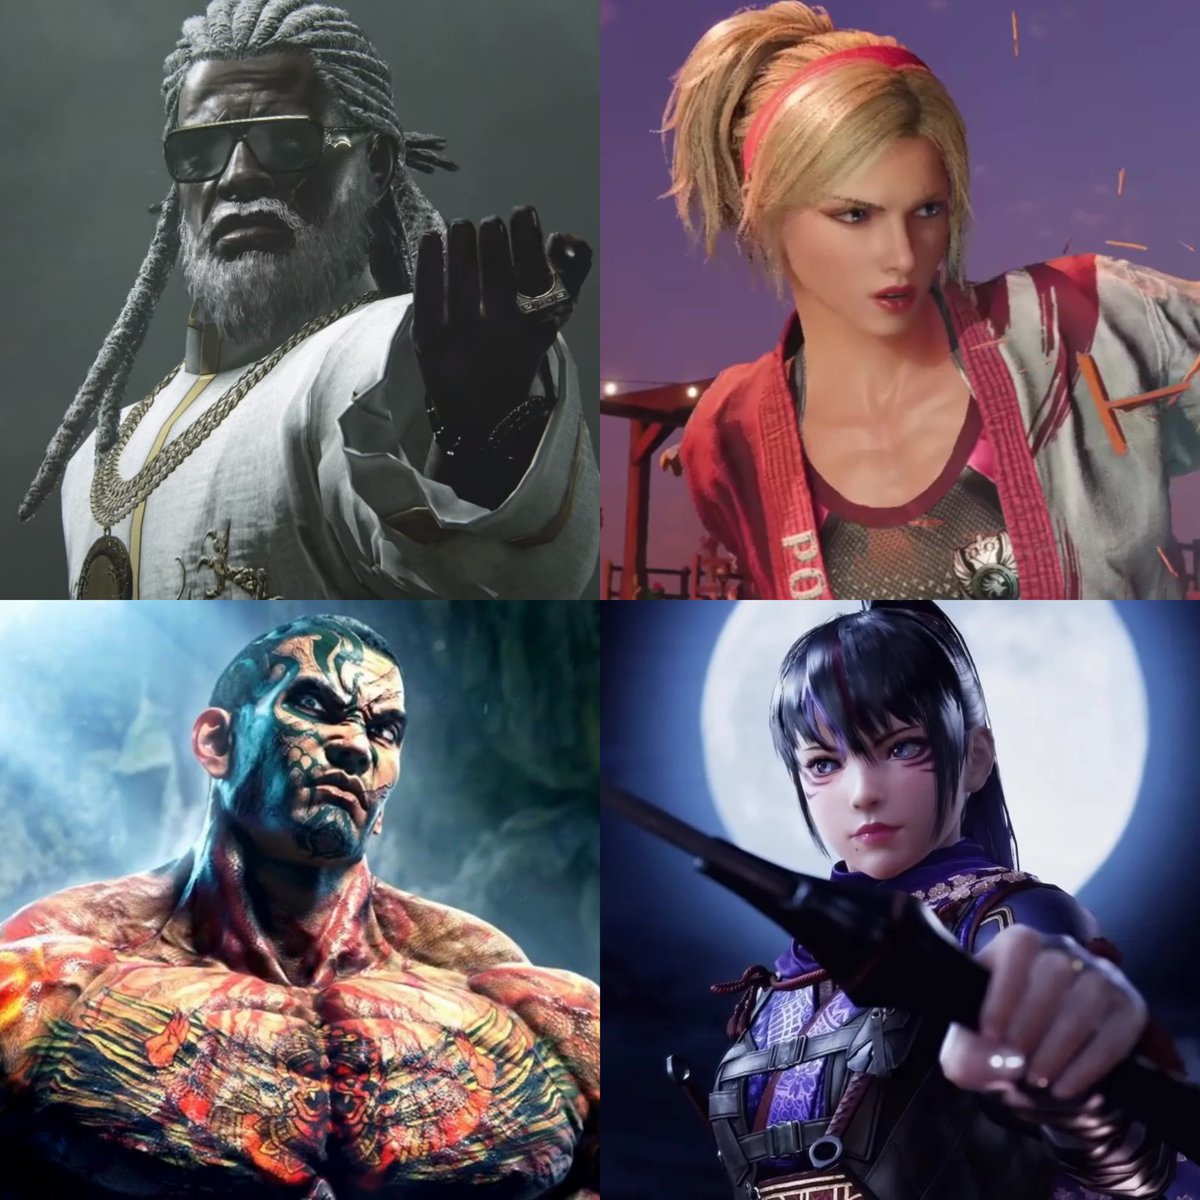 Well, I think the other two are coming, the 'New Generation' of Tekken 7